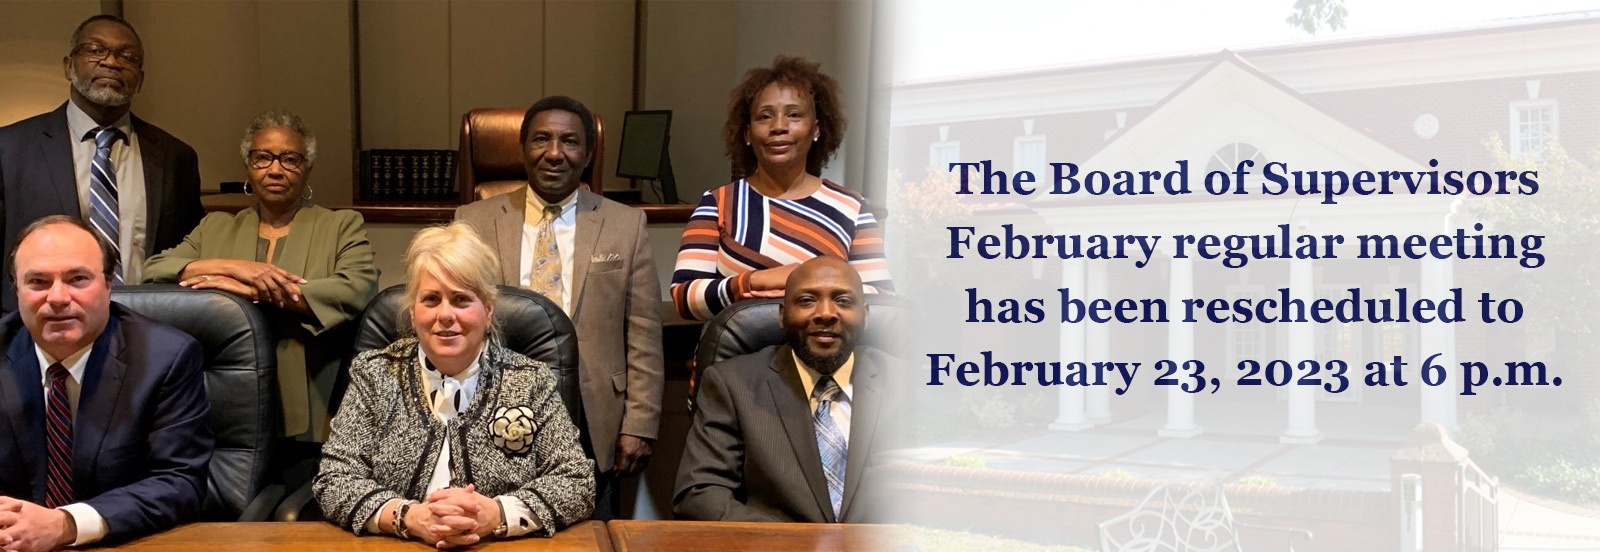 The Board of Supervisors February Meeting Rescheduled